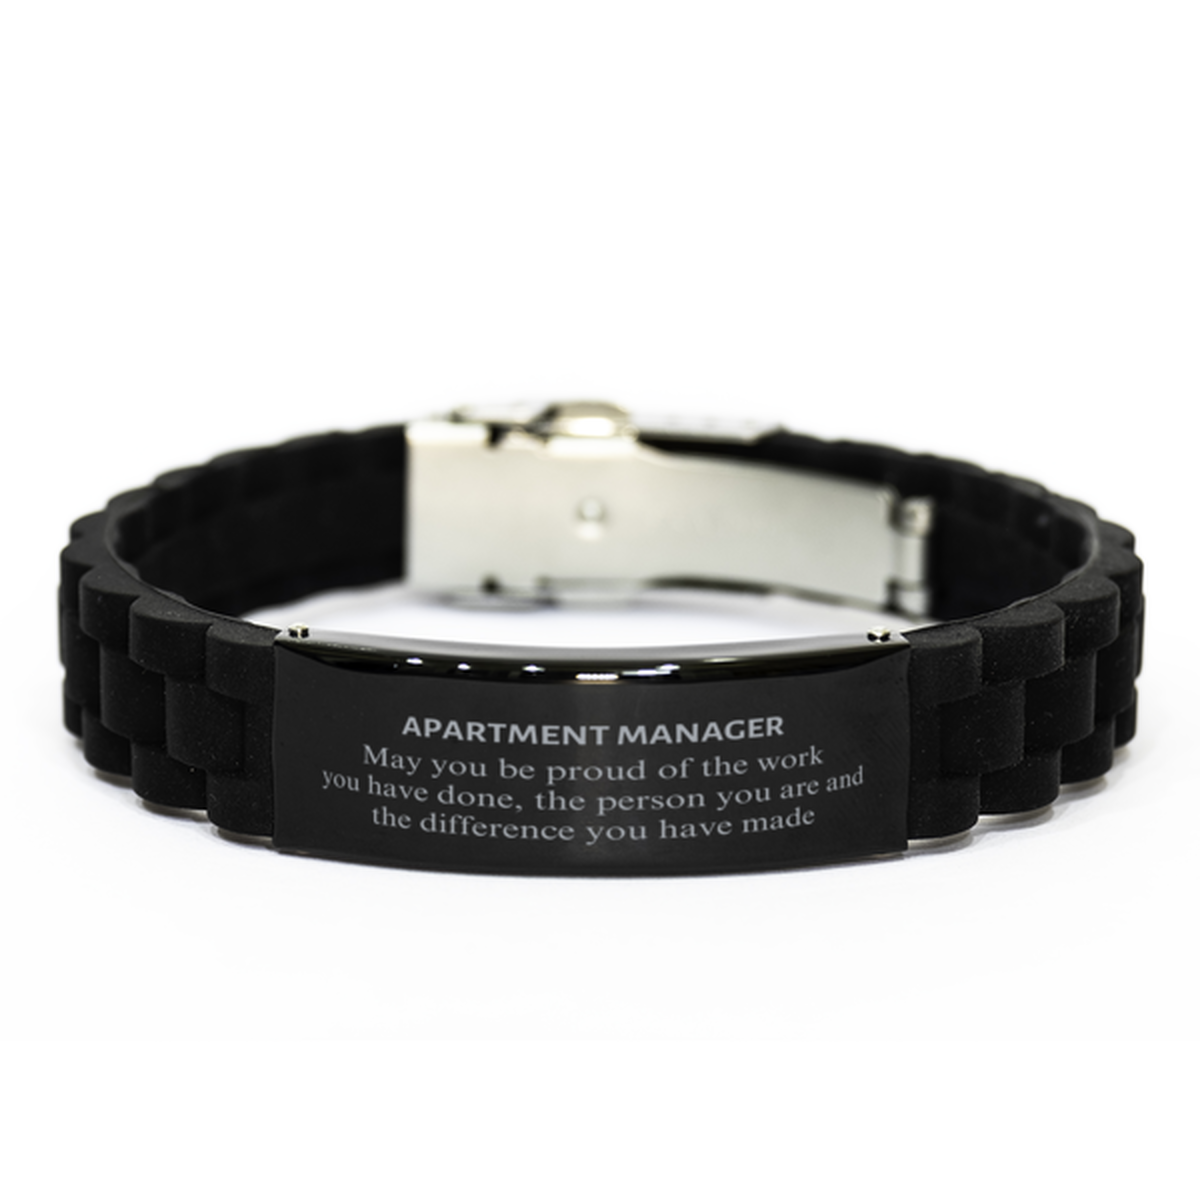 Apartment Manager May you be proud of the work you have done, Retirement Apartment Manager Black Glidelock Clasp Bracelet for Colleague Appreciation Gifts Amazing for Apartment Manager